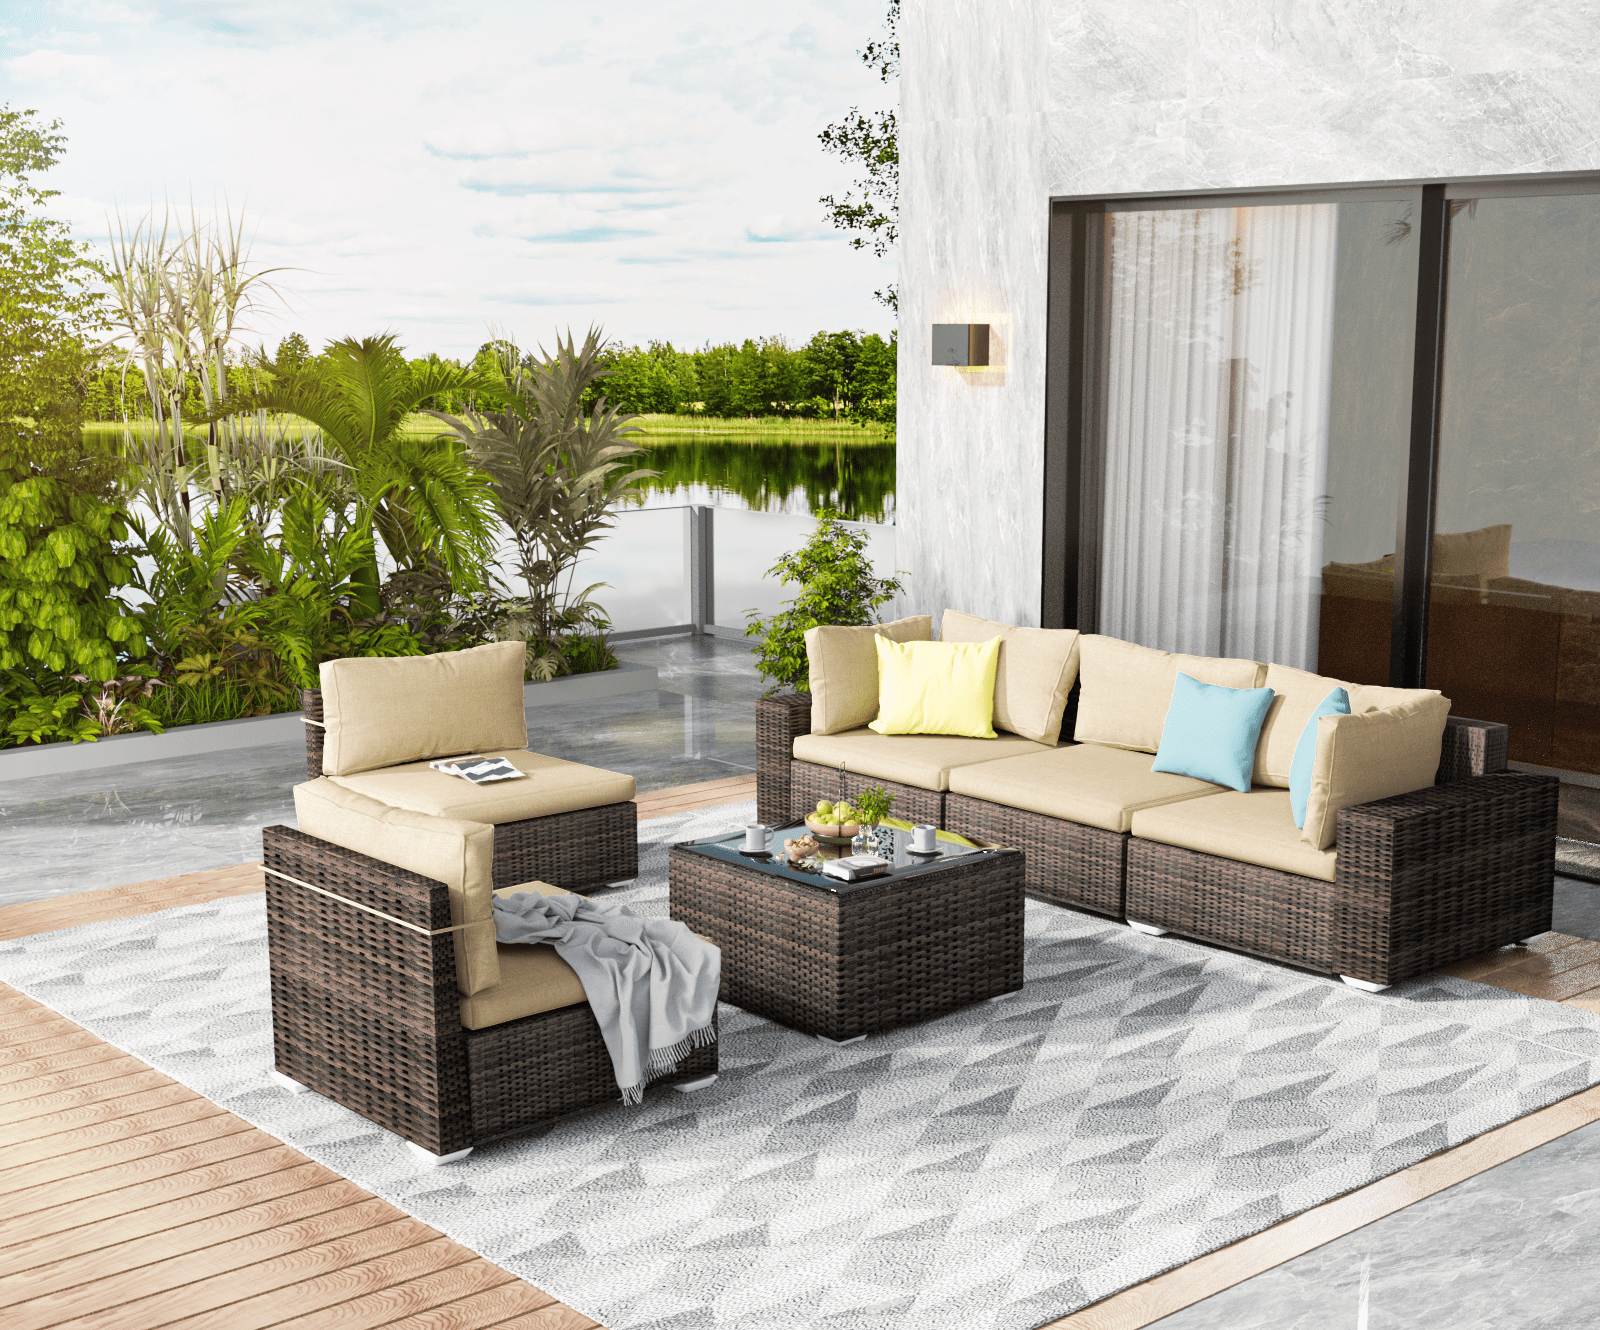 Patio Outdoor Furniture Sets